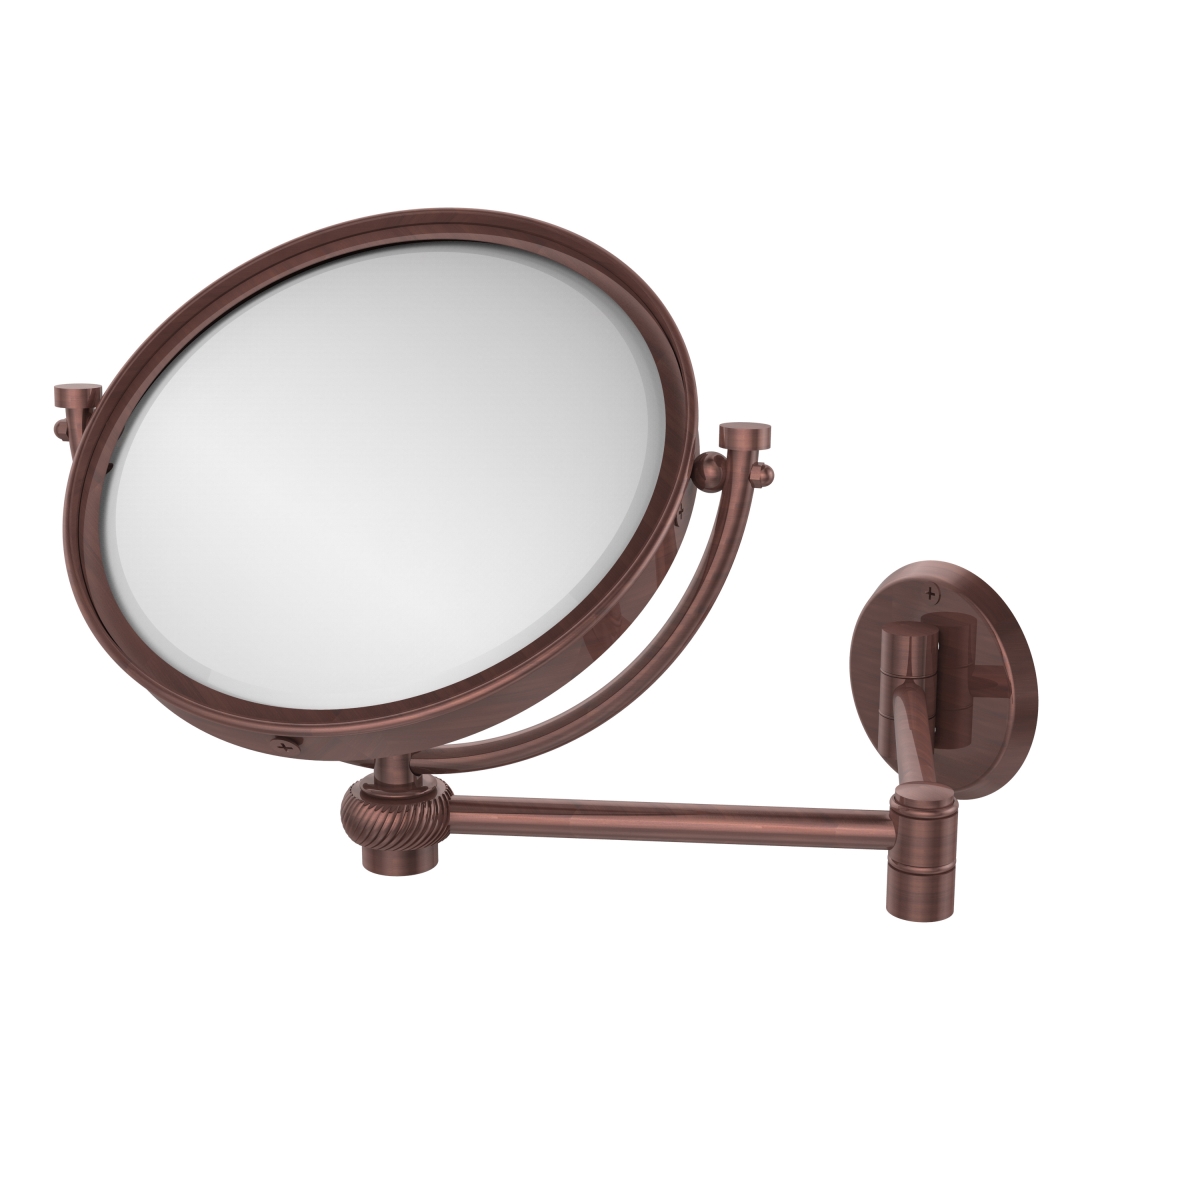 WM-6T-2X-CA 8 in. Wall Mounted Extending Make-Up Mirror 2X Magnification with Twist Accent, Antique Copper -  Allied Brass, WM-6T/2X-CA